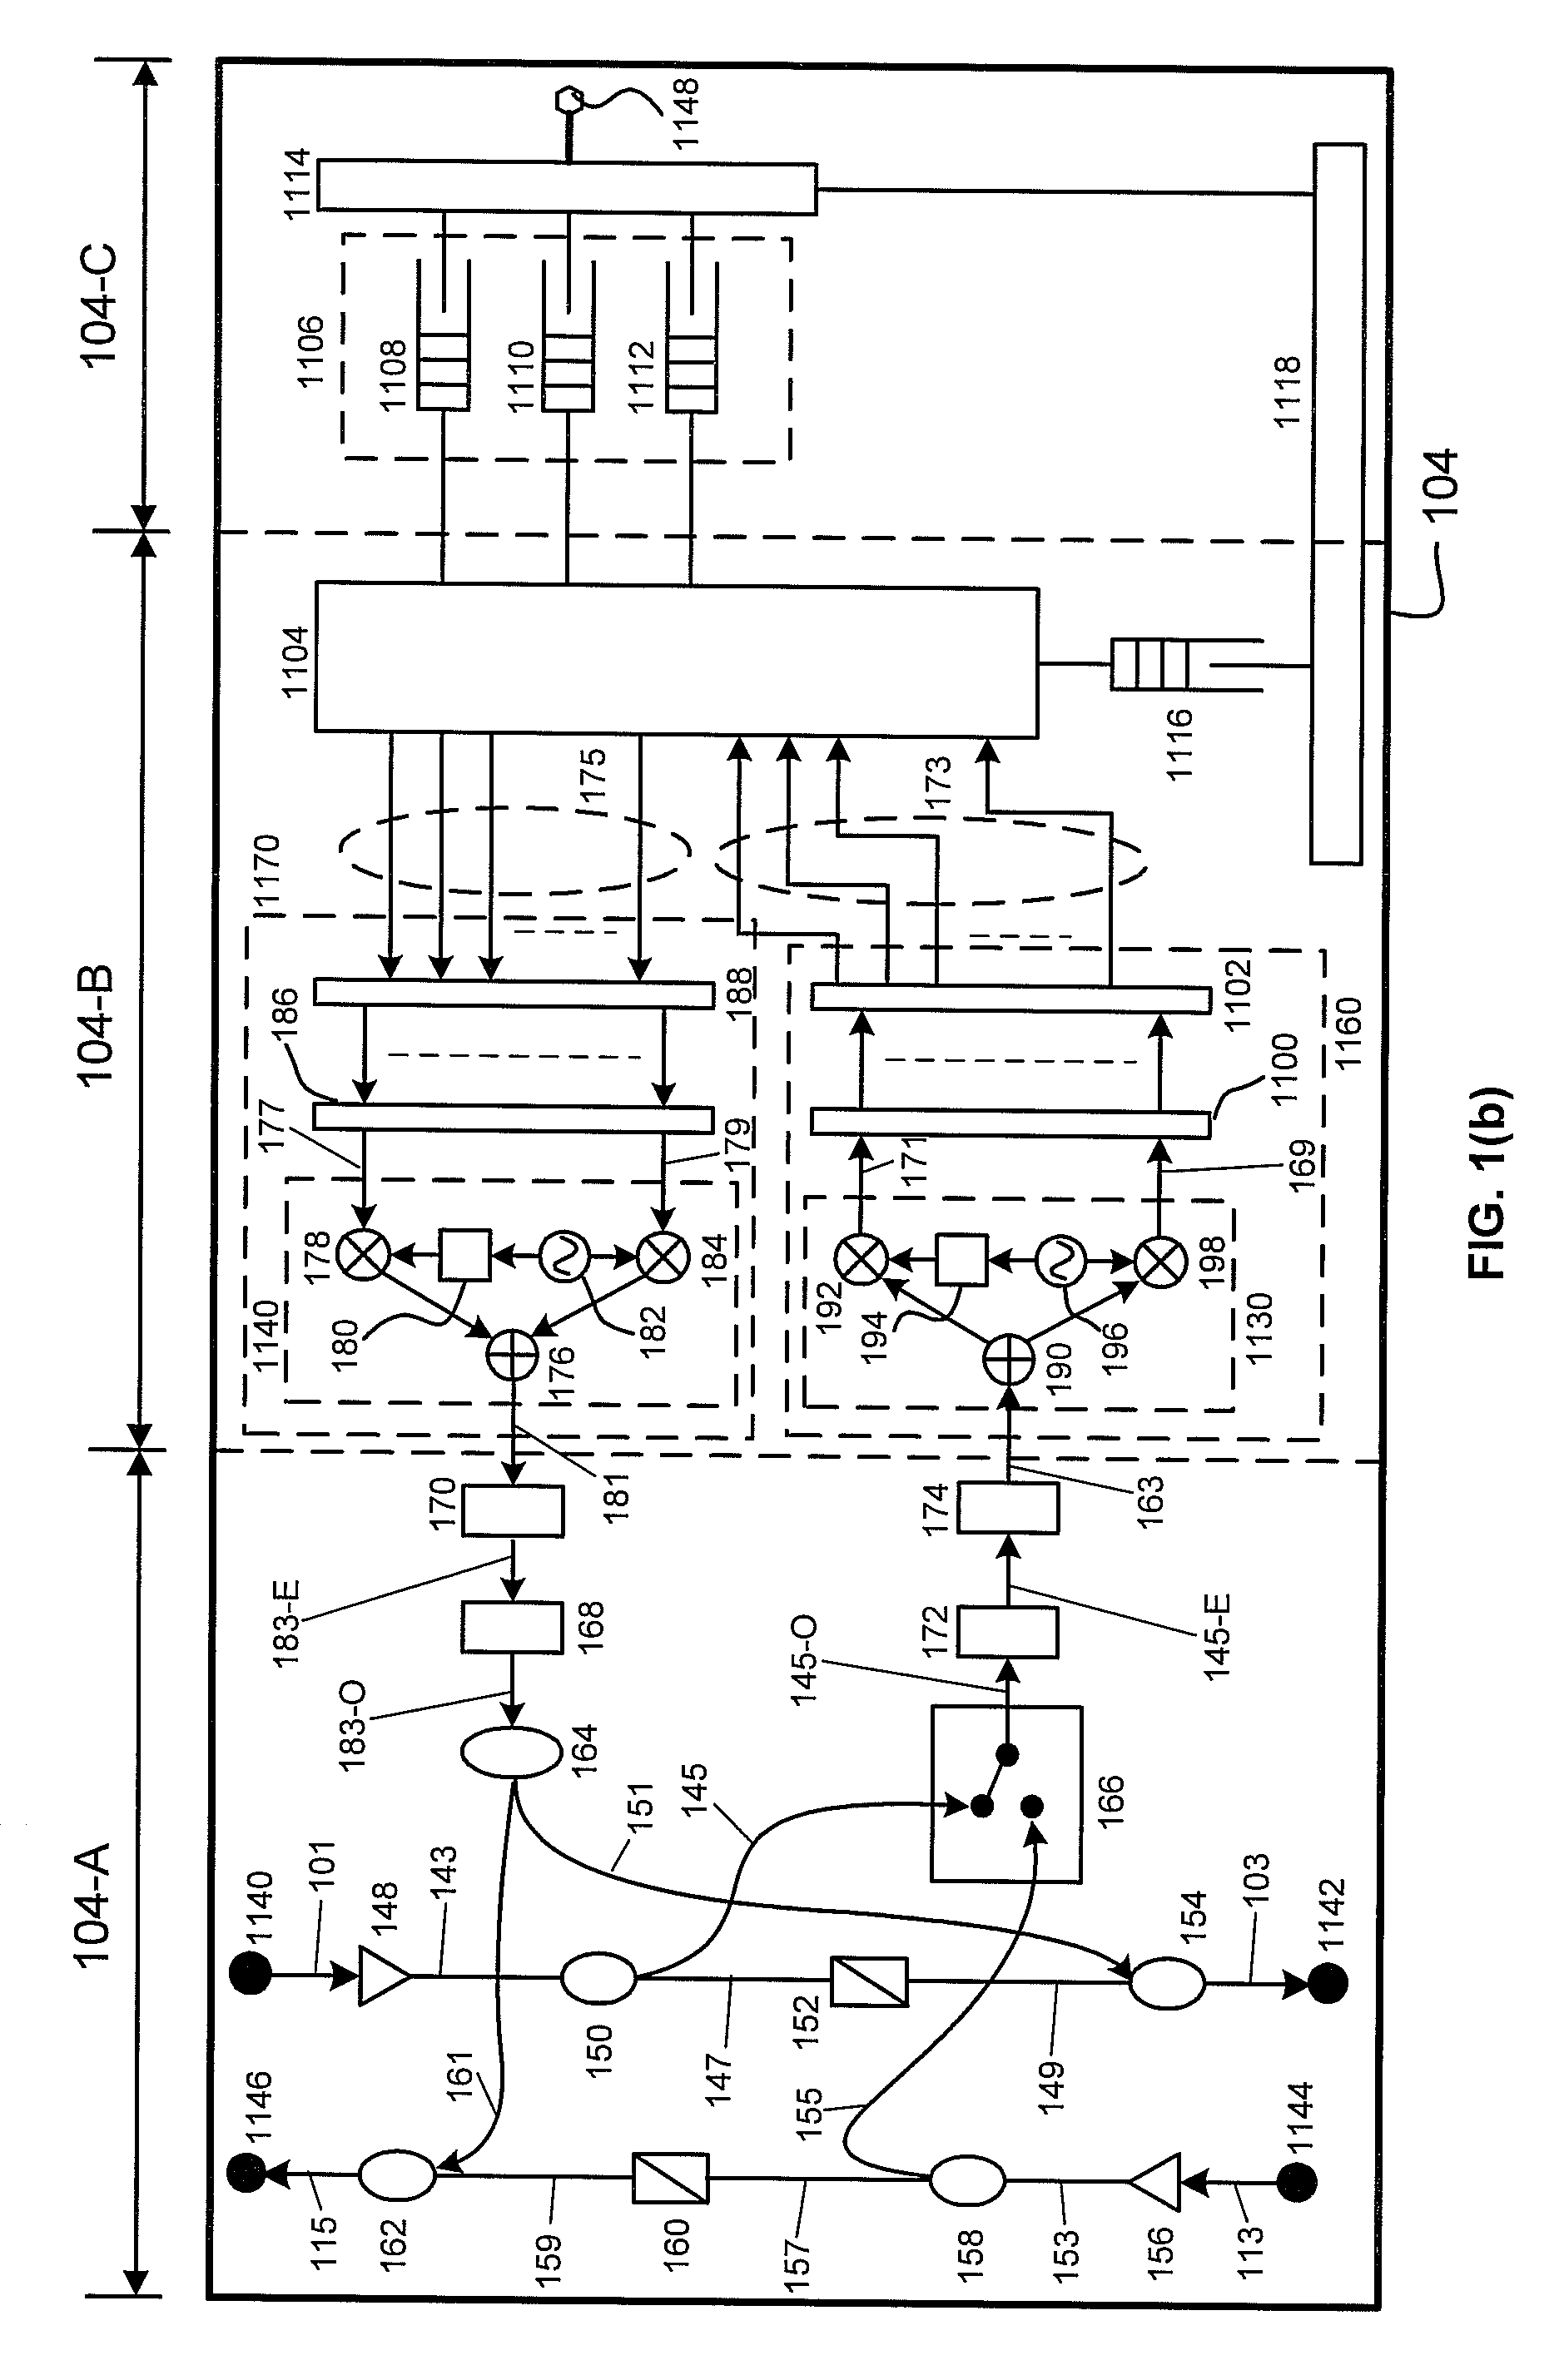 Orthogonal Frequency Division Multiple Access Based Optical Ring Network